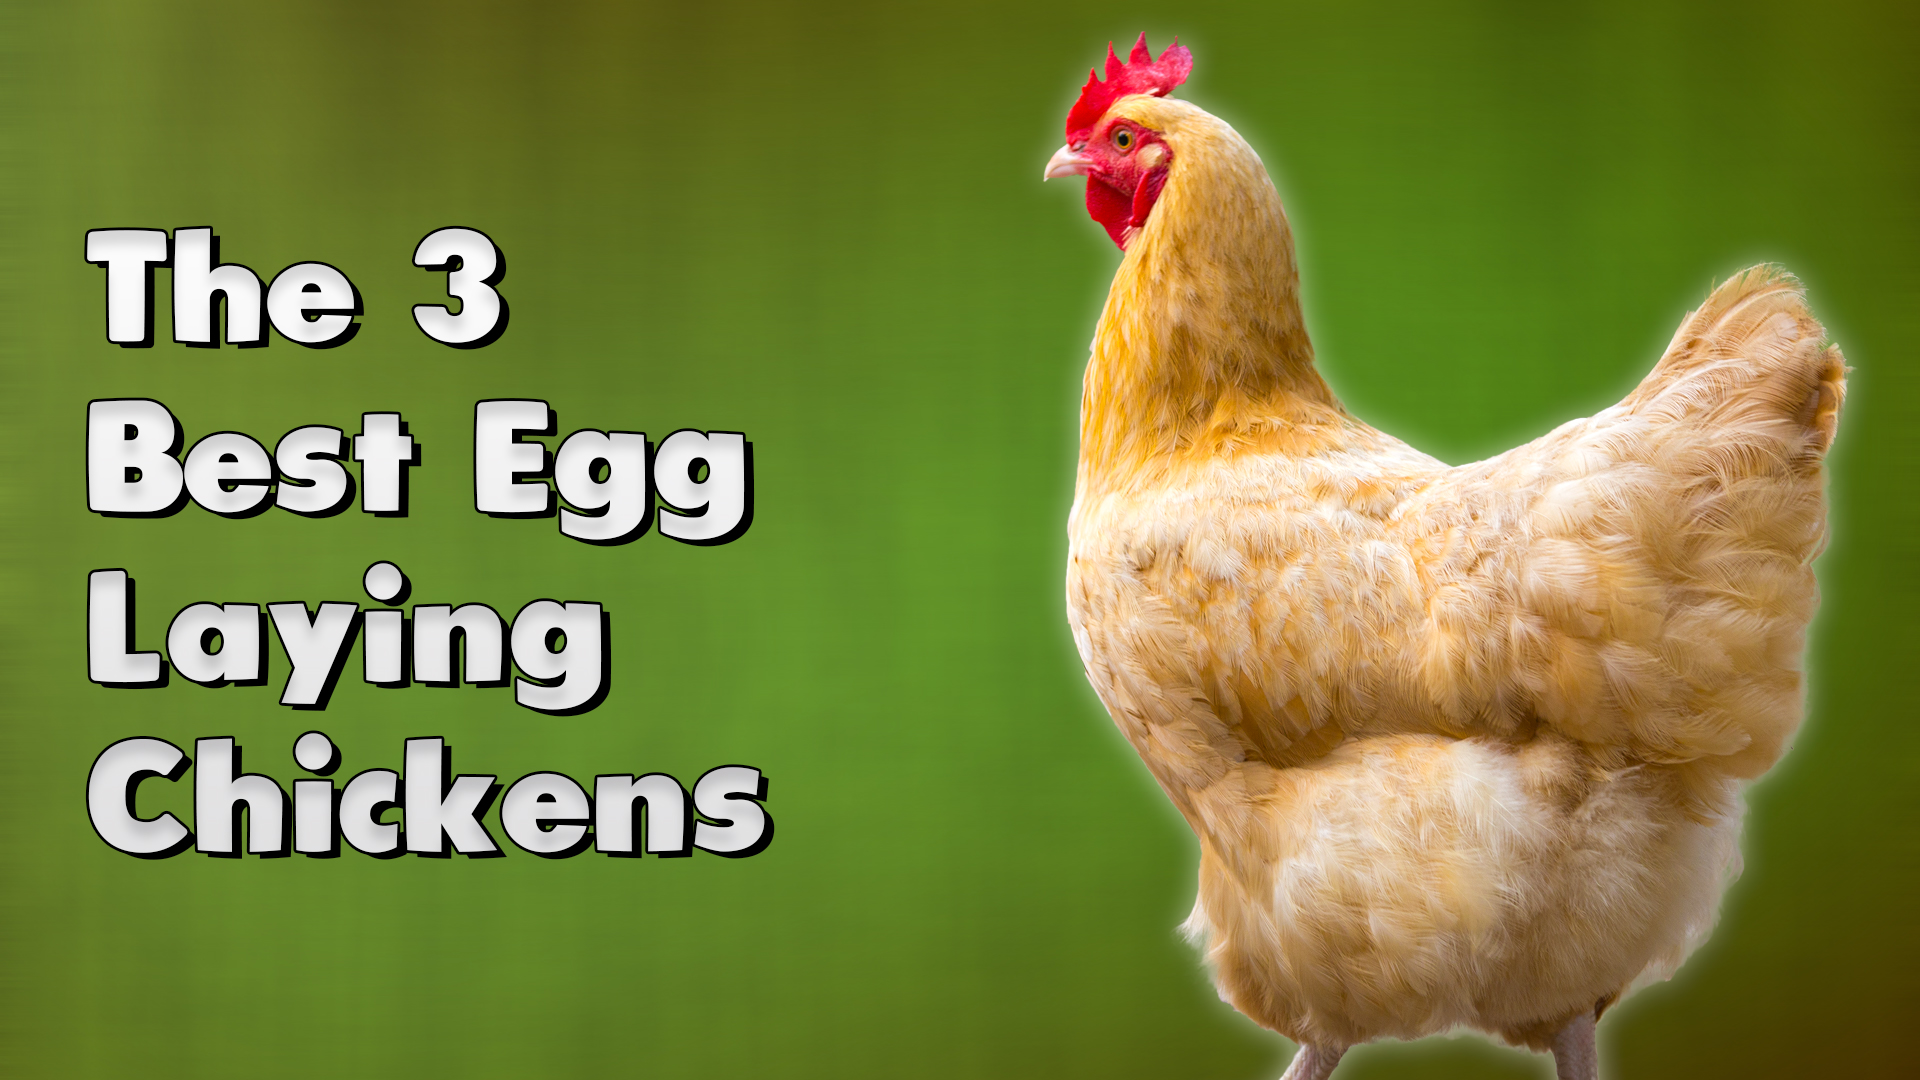 The 3 Best Egg Laying Chickens